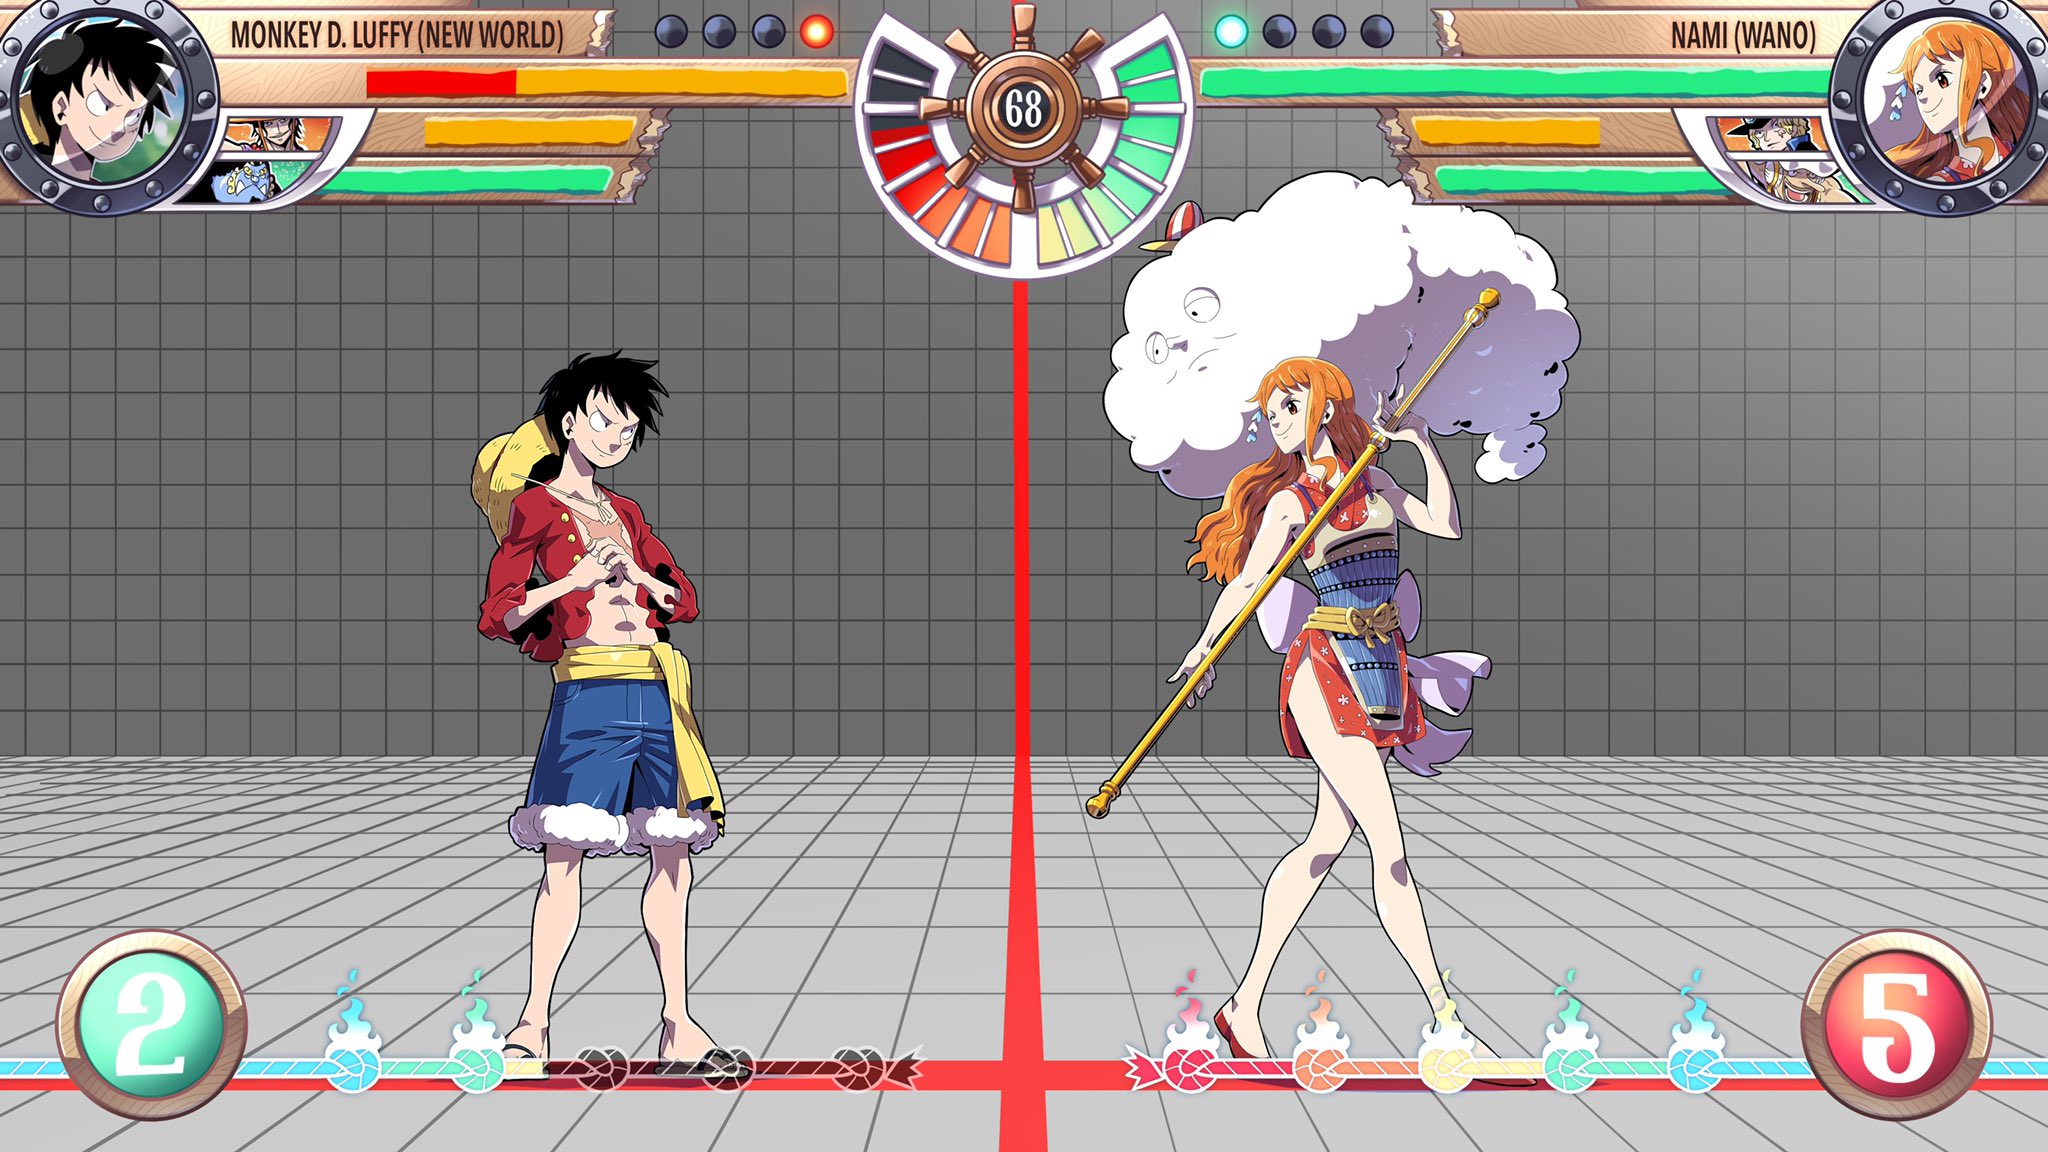 If Arc System Works made another fighting game based off an anime